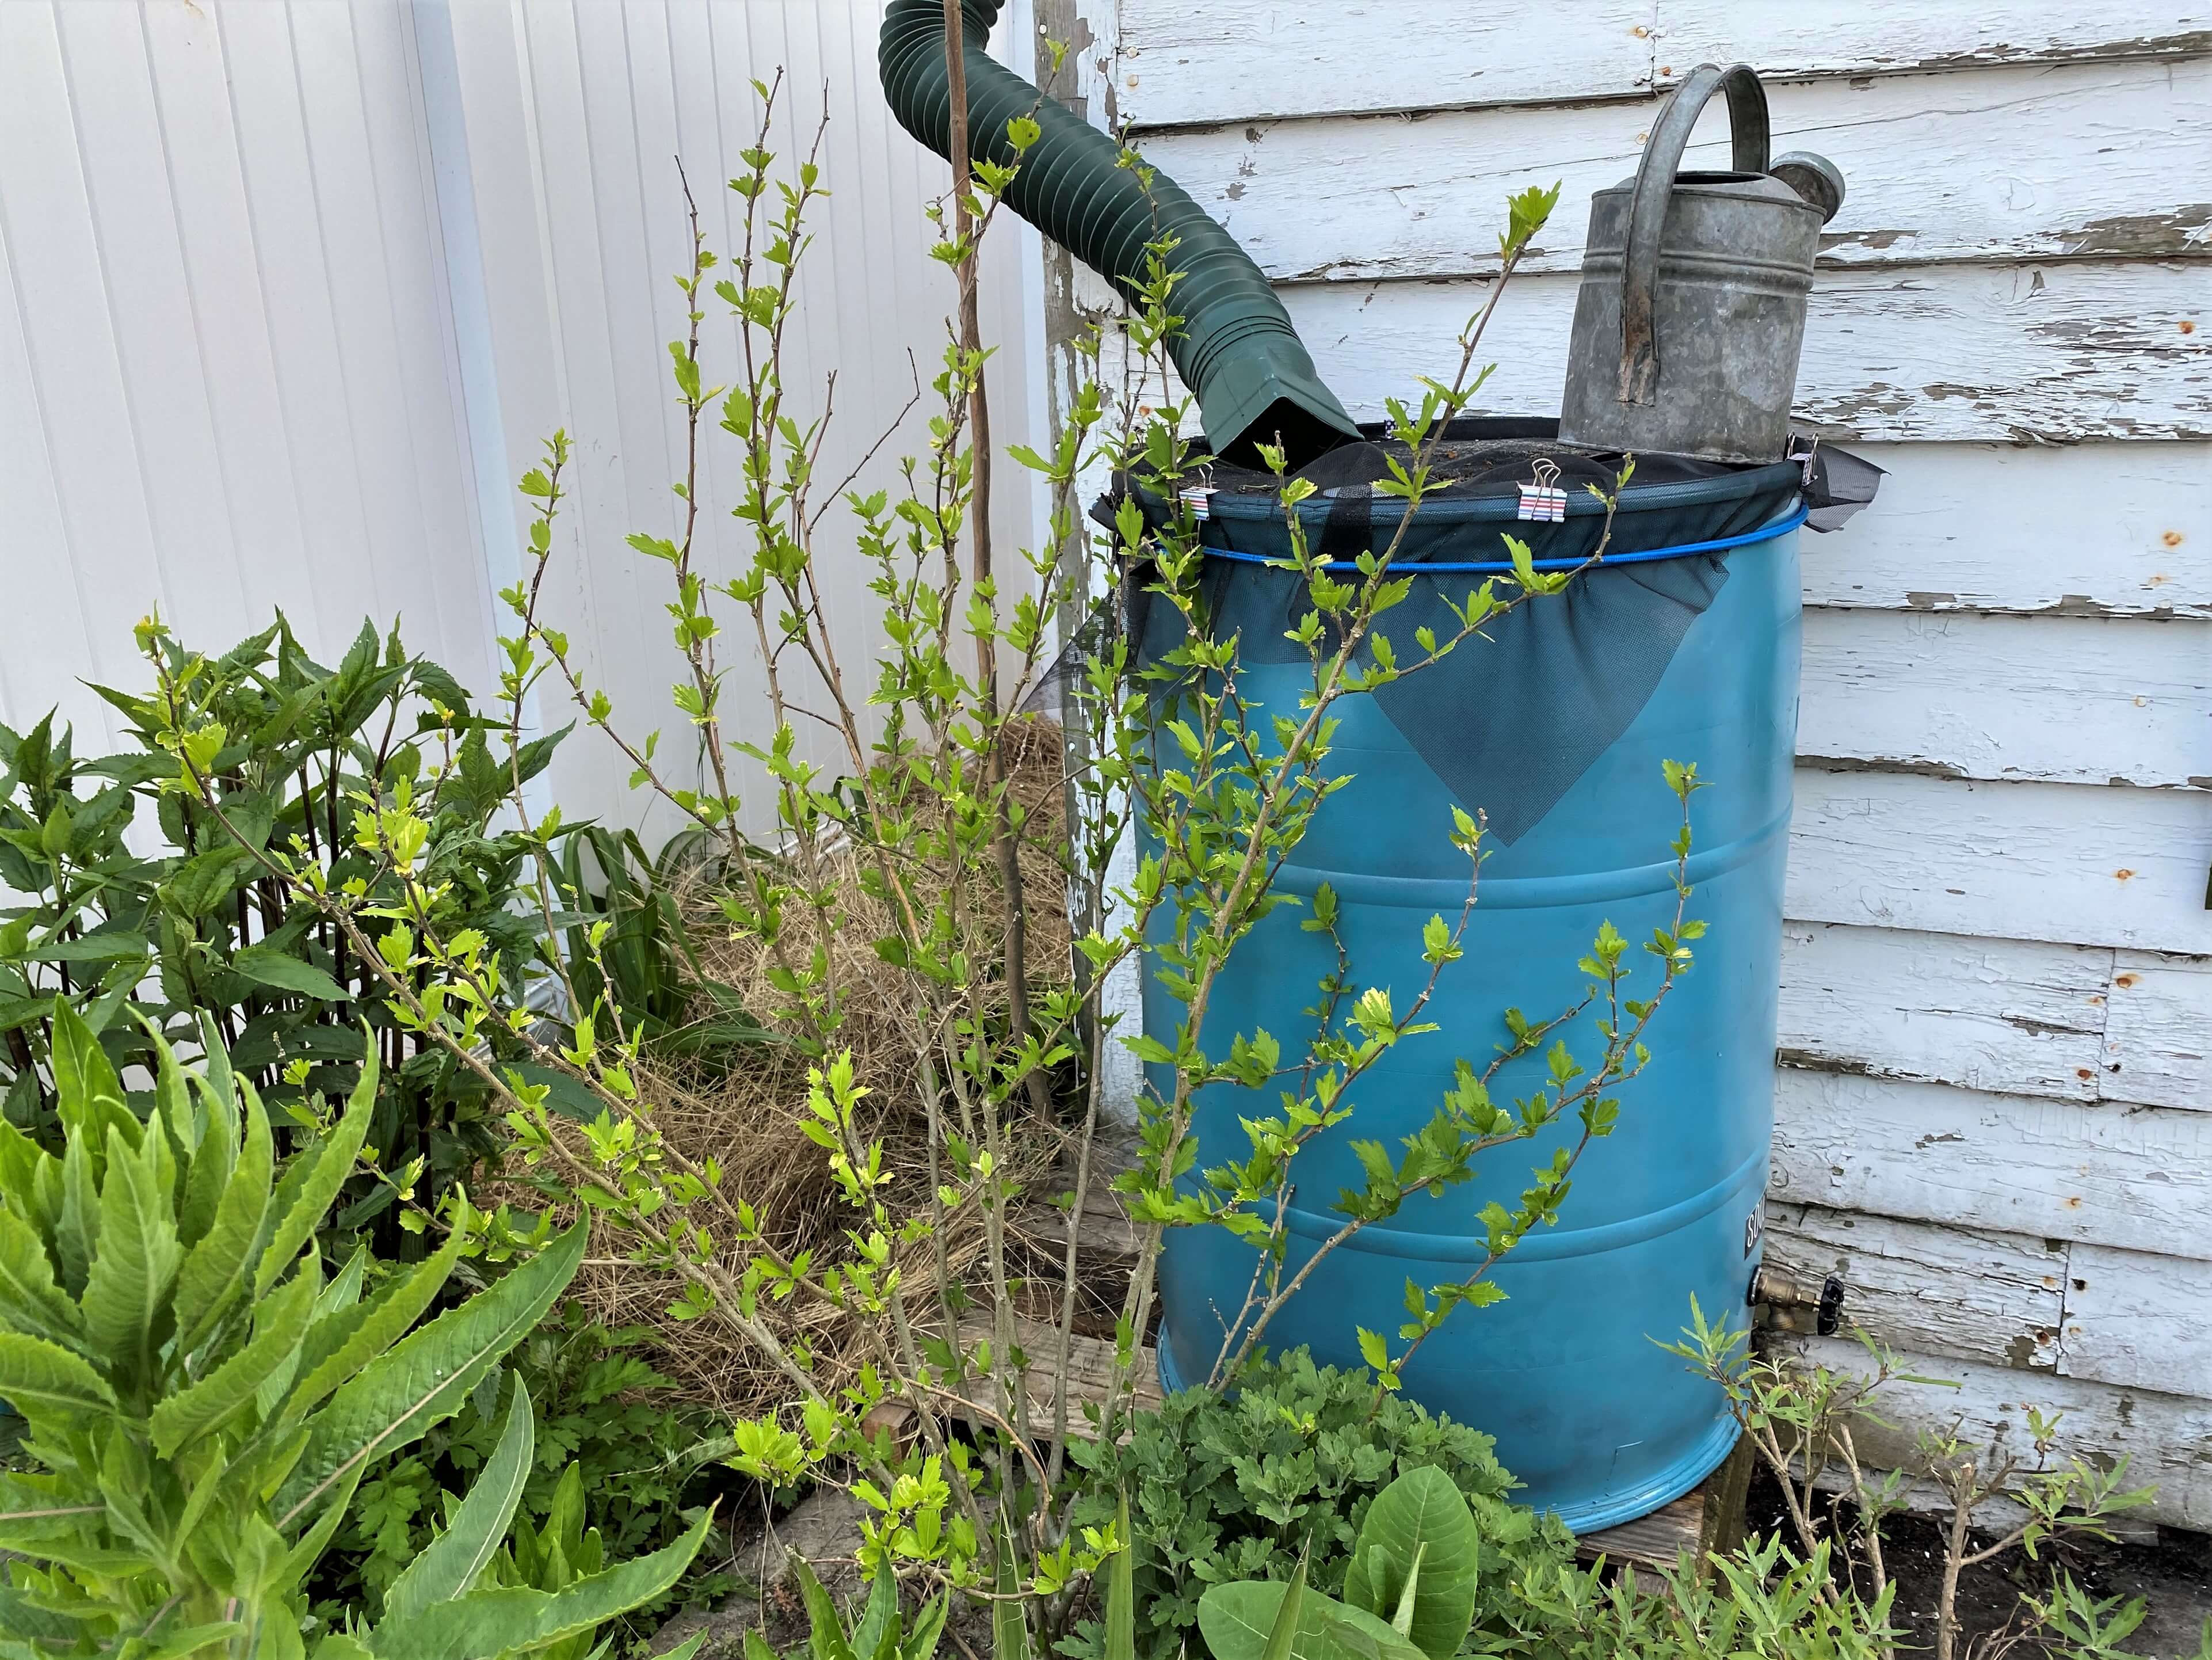 A recently installed rain barrel in the Gardens section of Ocean City will collect water to use on a backyard garden. Proponents say a rain barrel can keep large amounts of water out of drainage systems and means using less drinking water for outside uses.